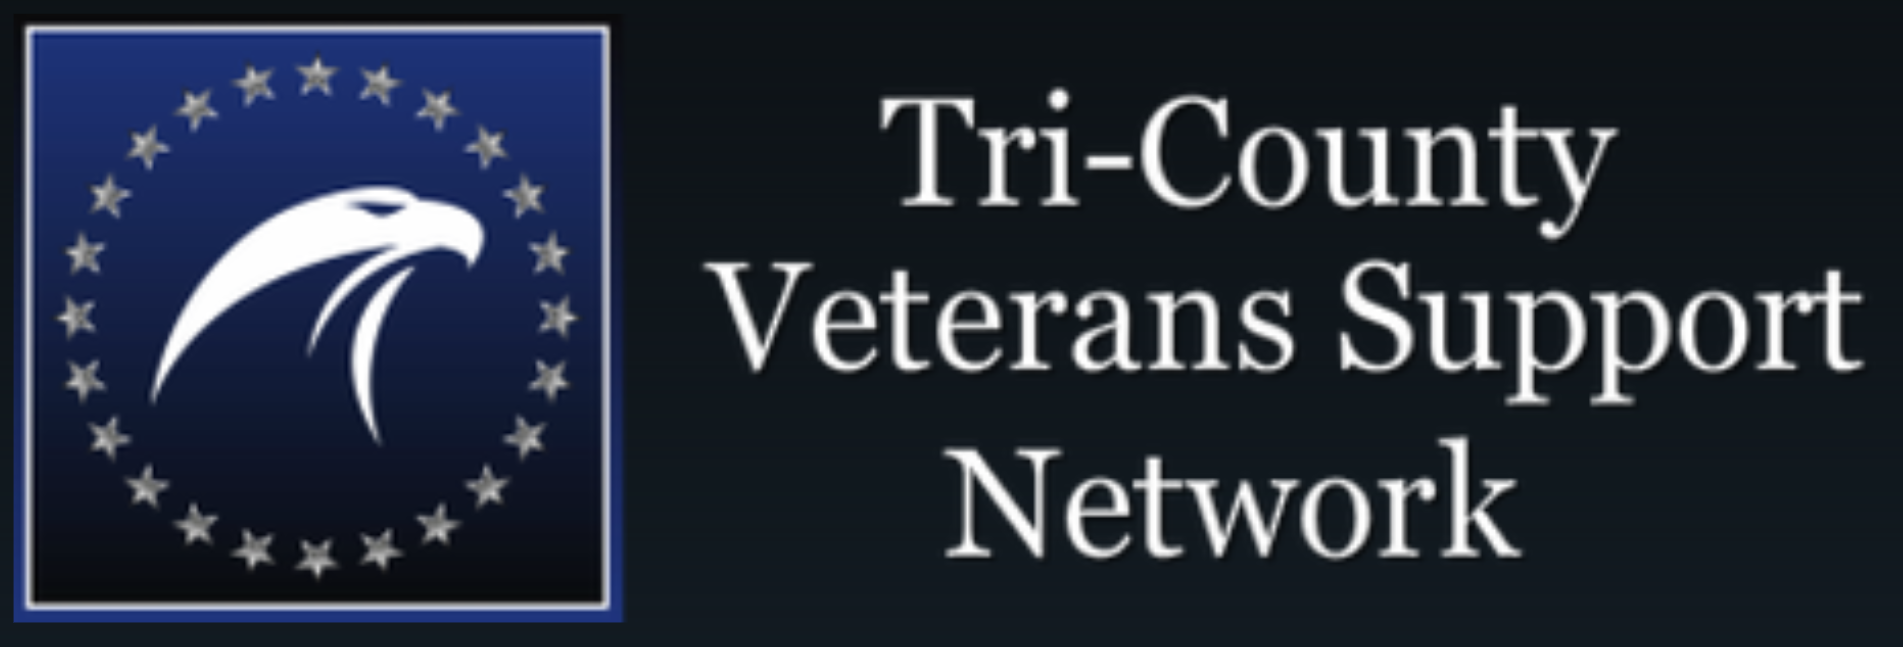 Tri-County Veterans Support Network